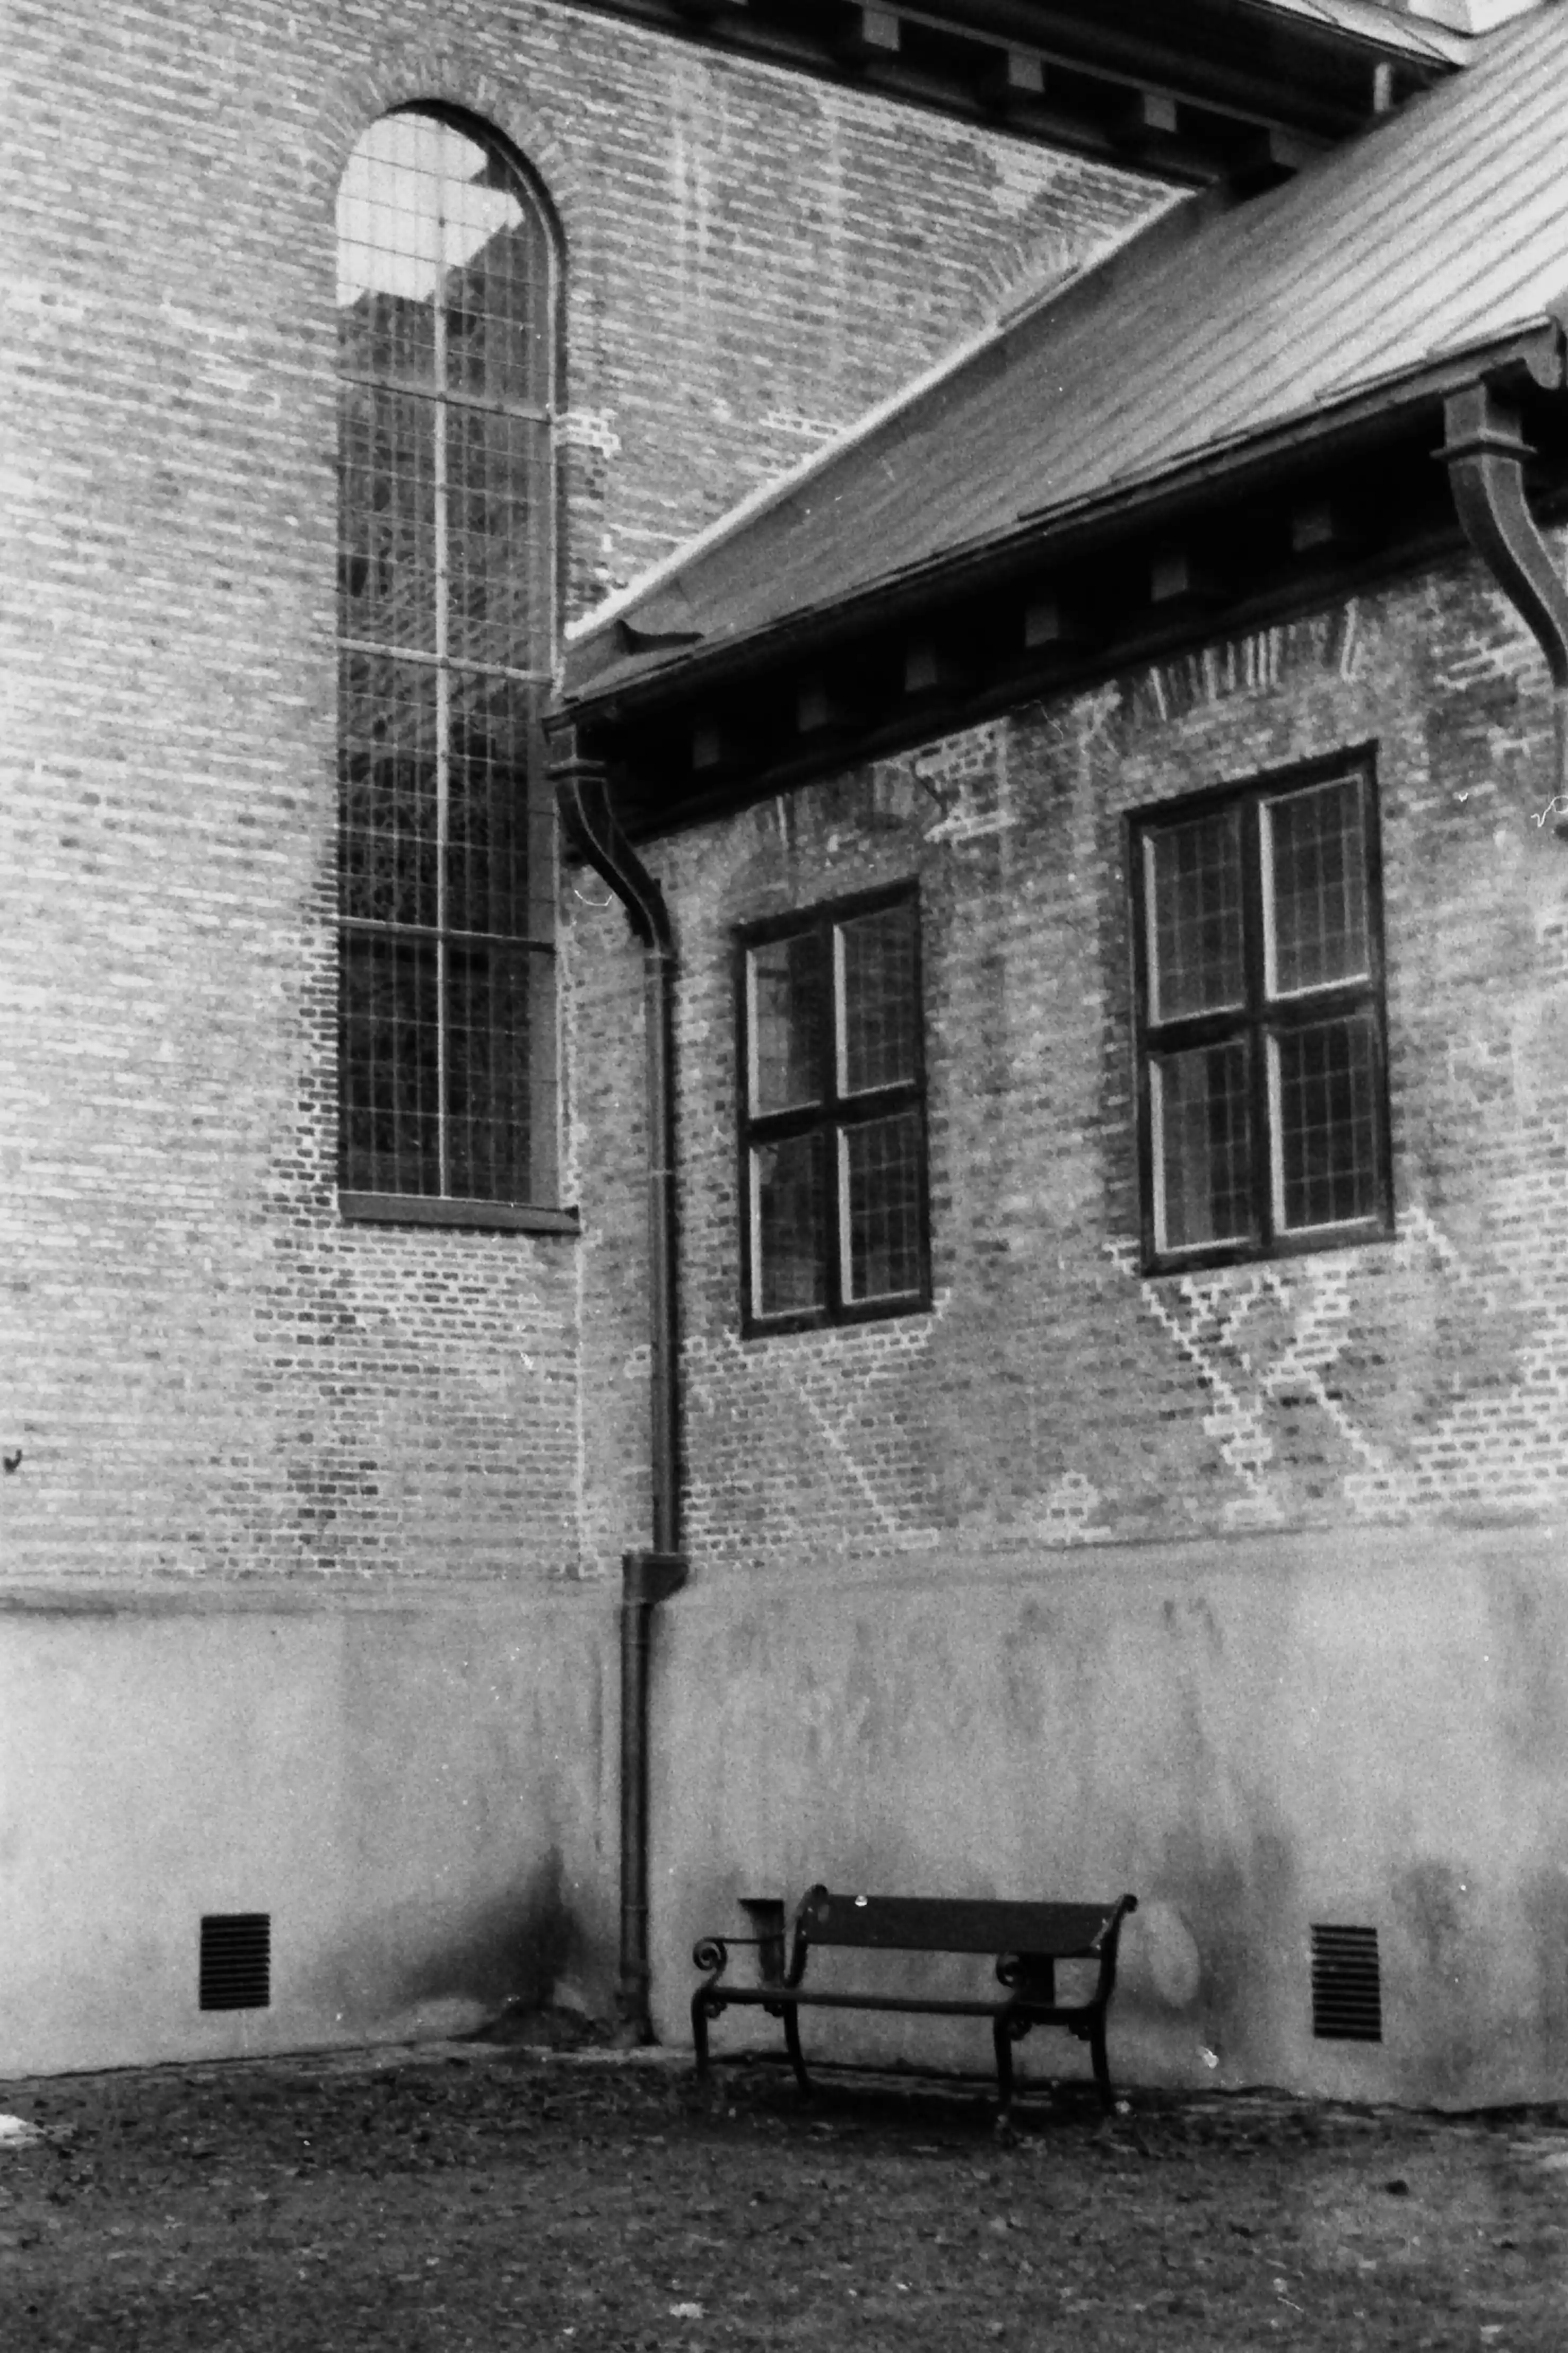 Black and white picture in portrait mode of the side of a church with a single lonely bench